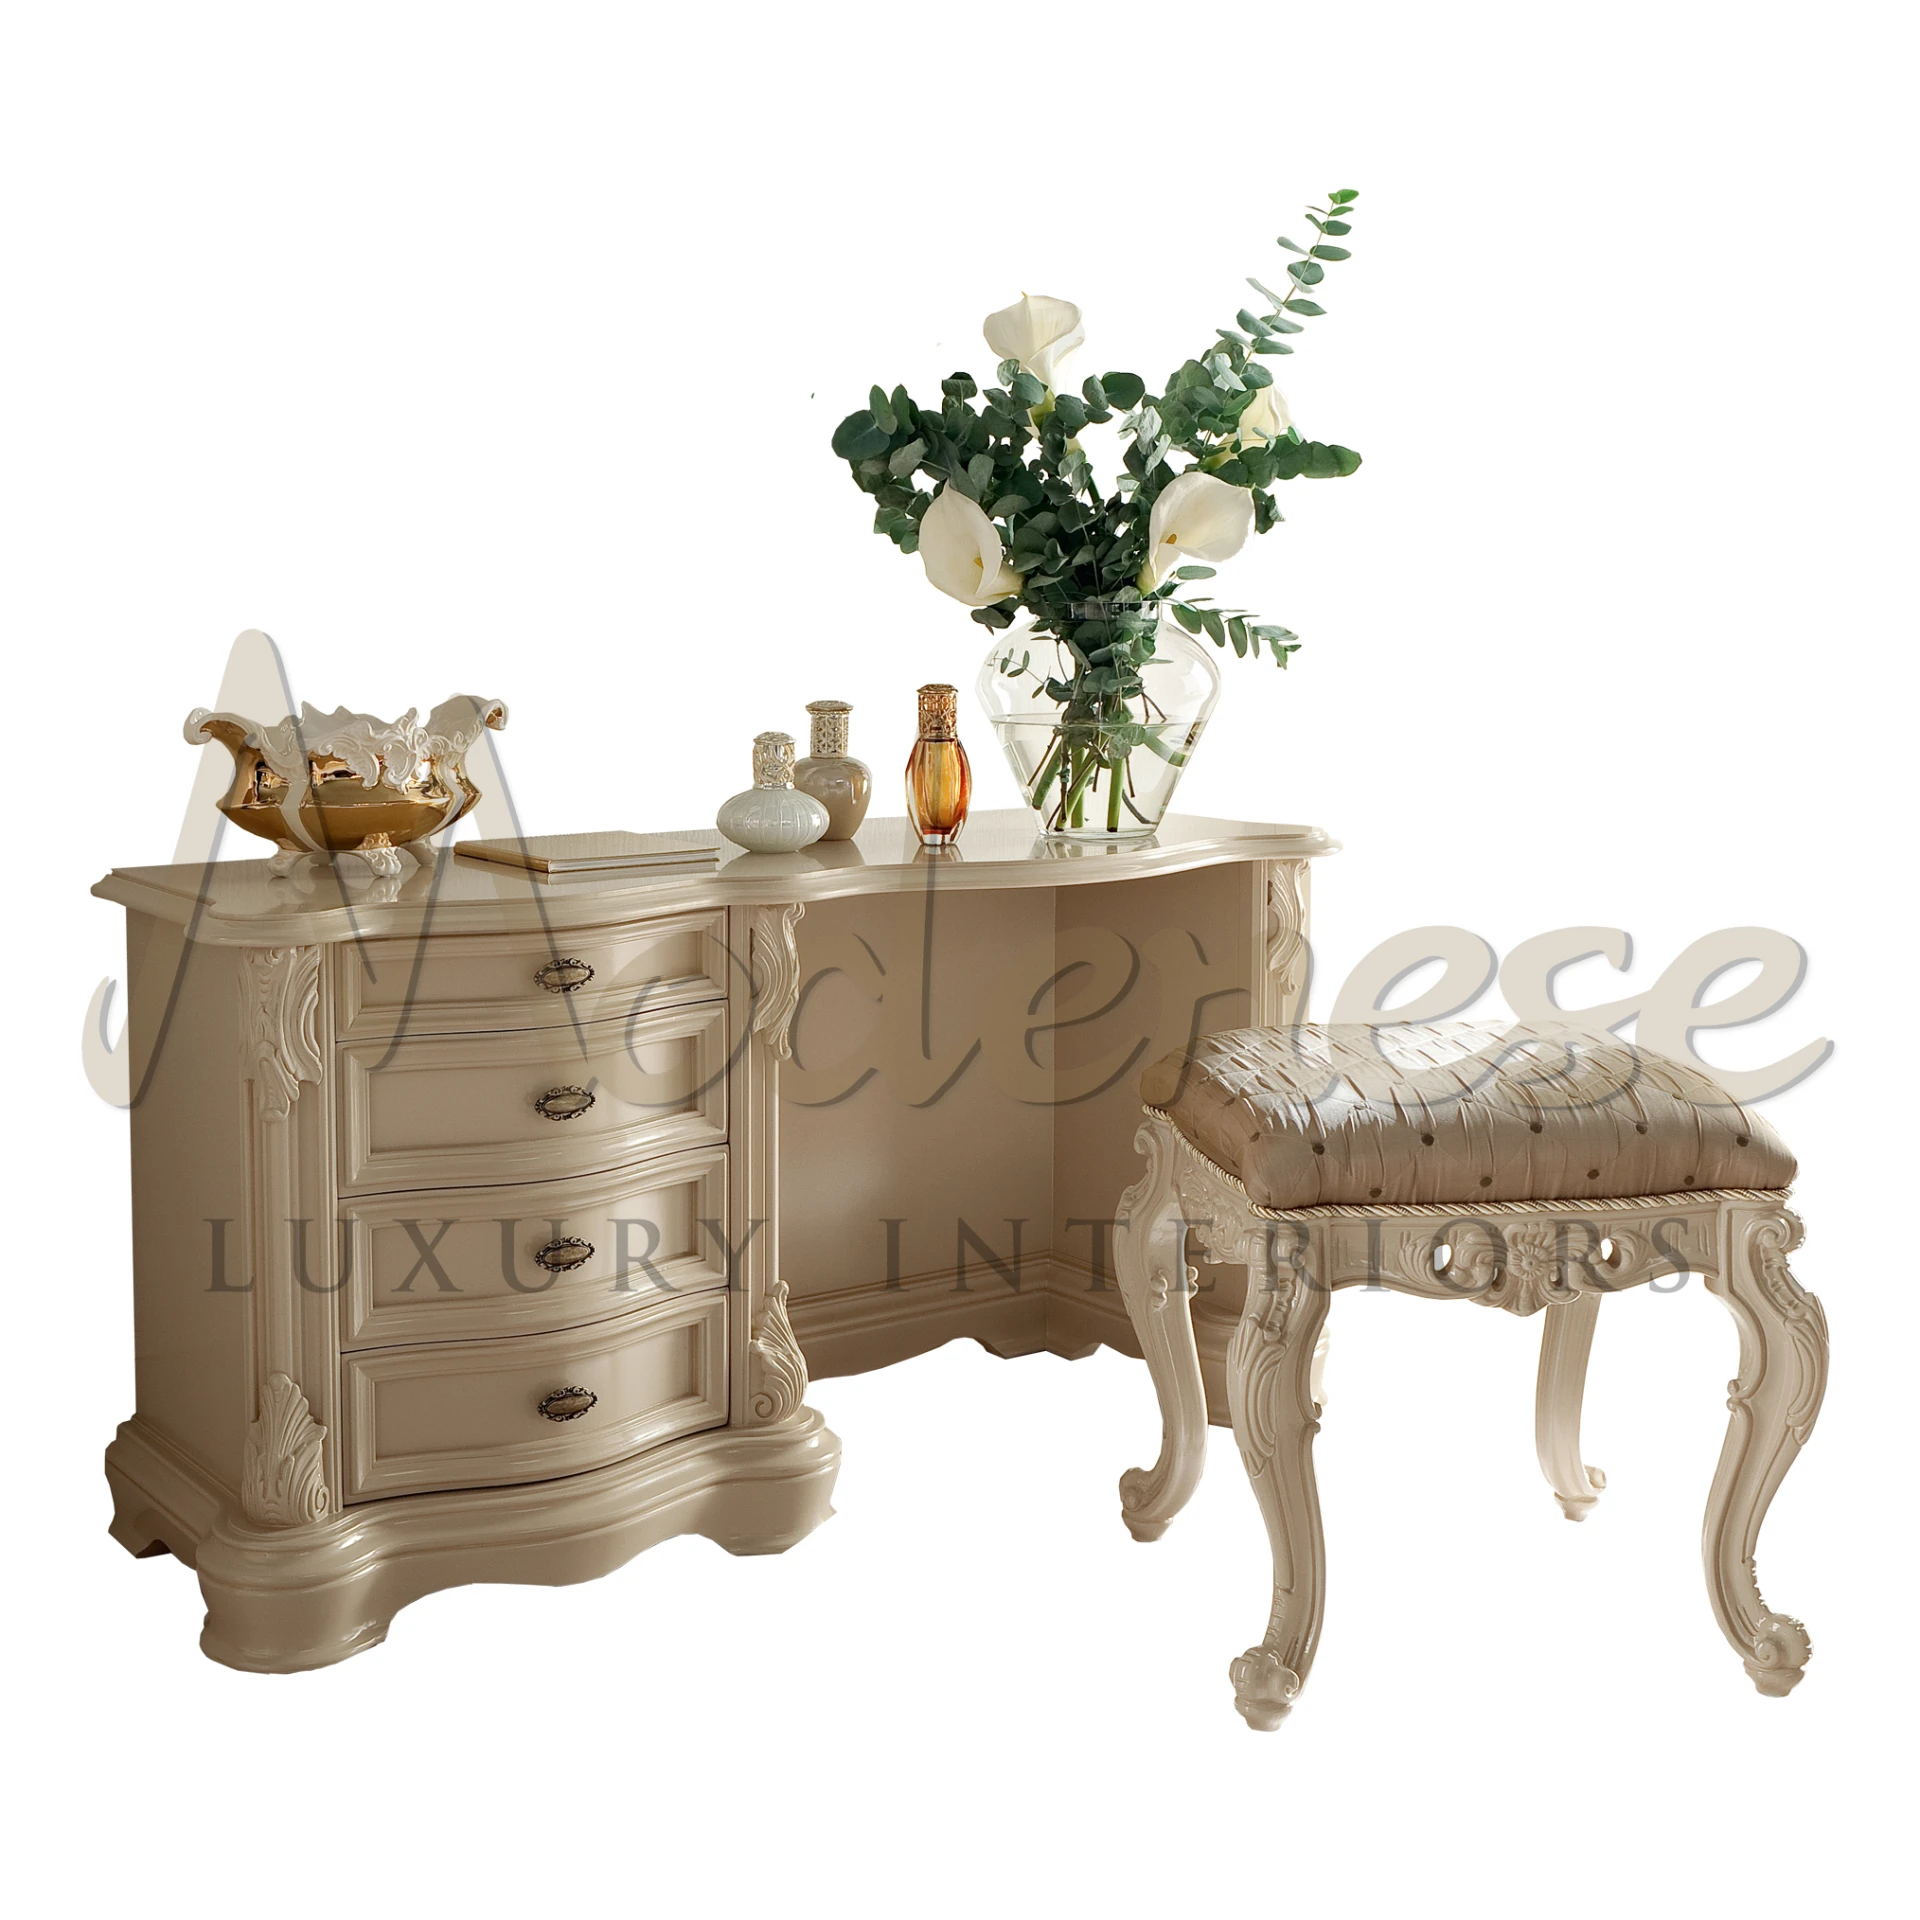 Beige French provincial dressing table with decorative carvings and a complementing stool with a patterned seat, adorned with a vase of flowers and perfume bottles.